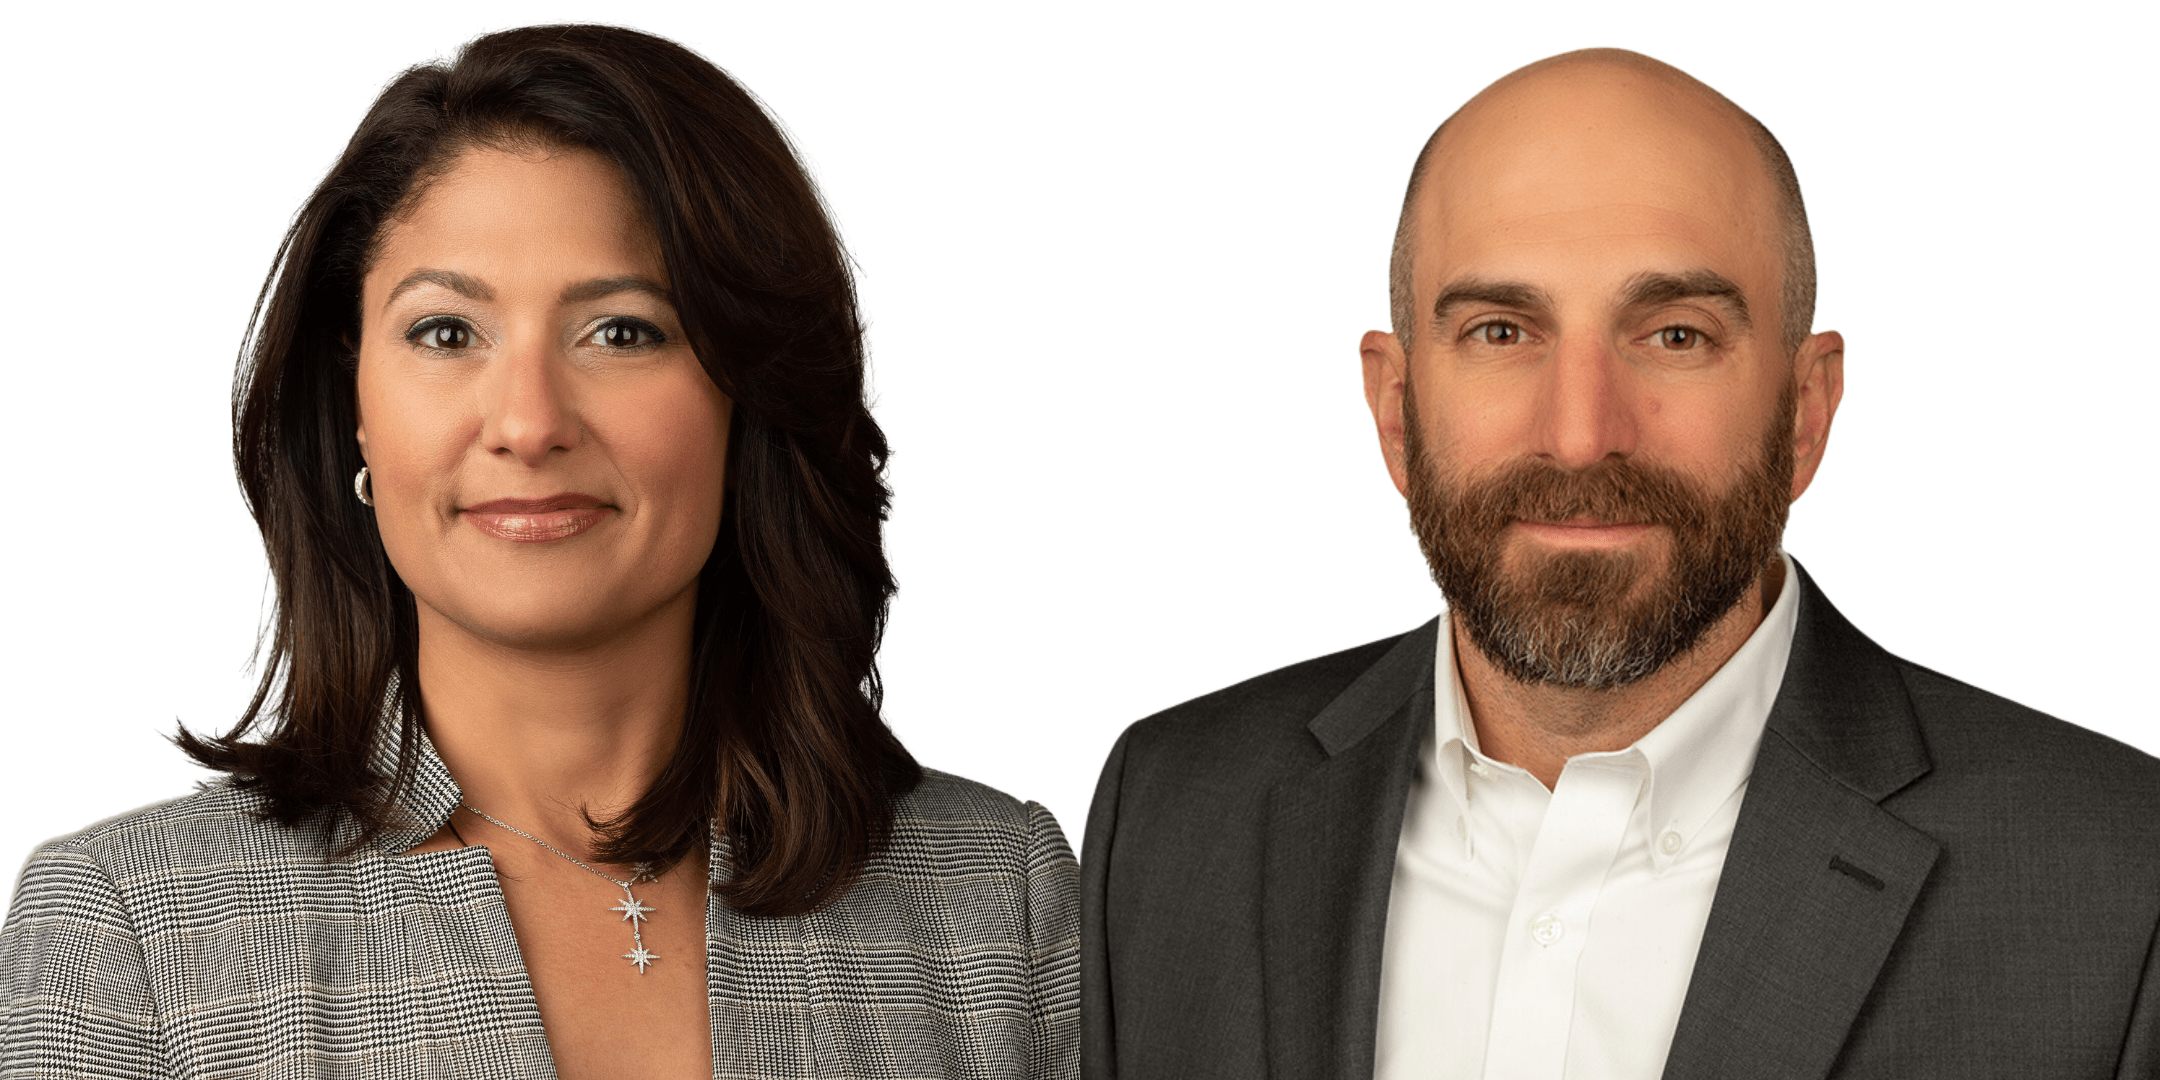 WISE CONSTRUCTION ANNOUNCES TWO NEW PROJECT EXECUTIVES